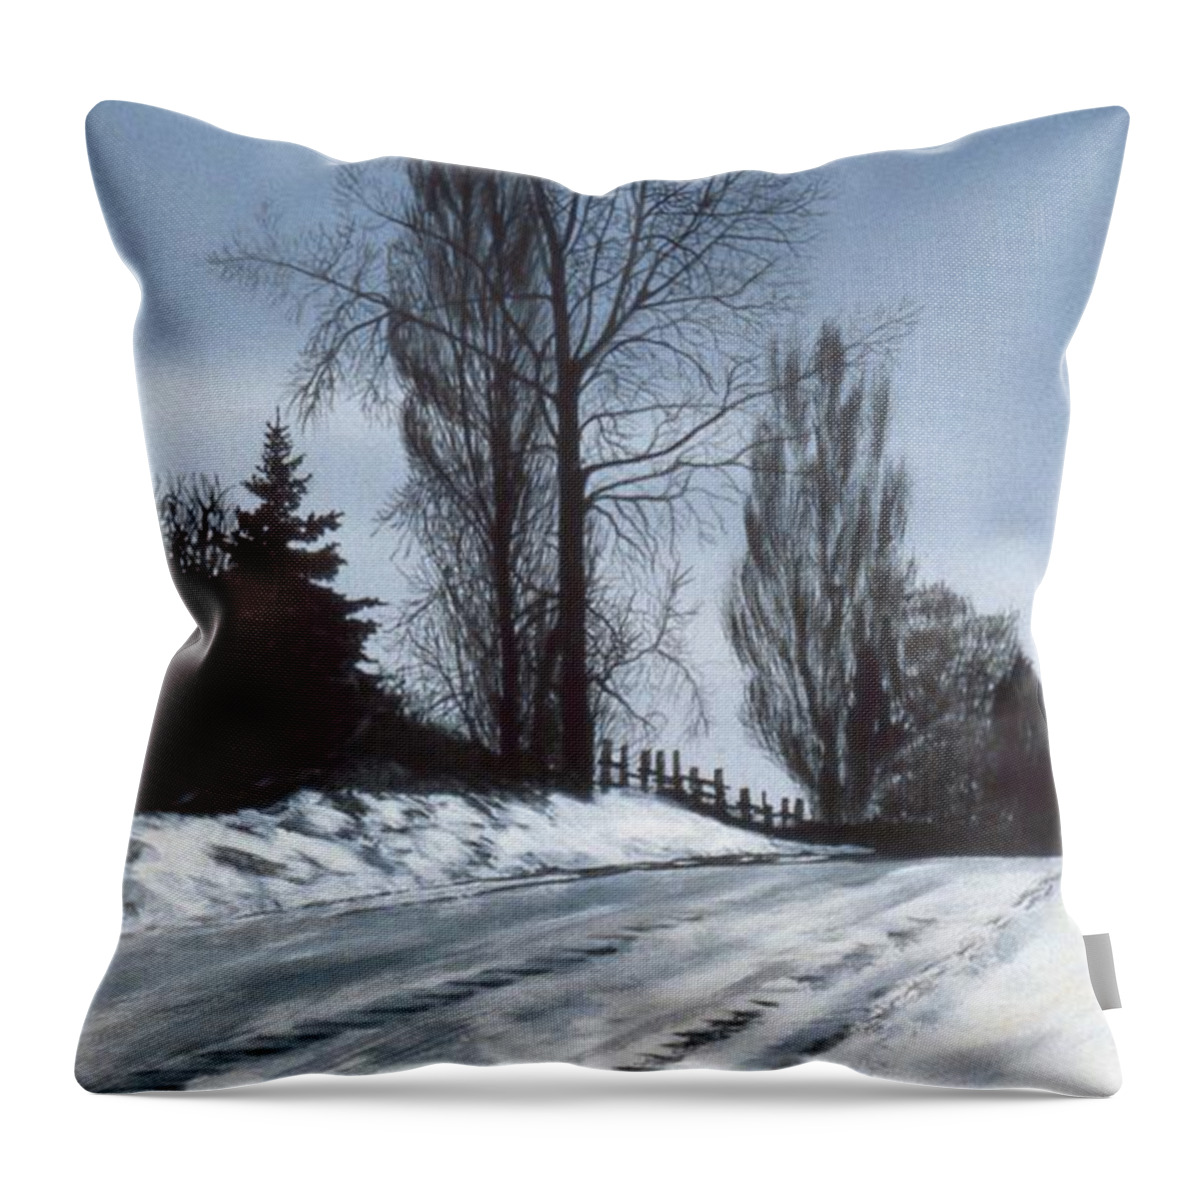  Throw Pillow featuring the painting San Juan Snow by Laurie Stewart